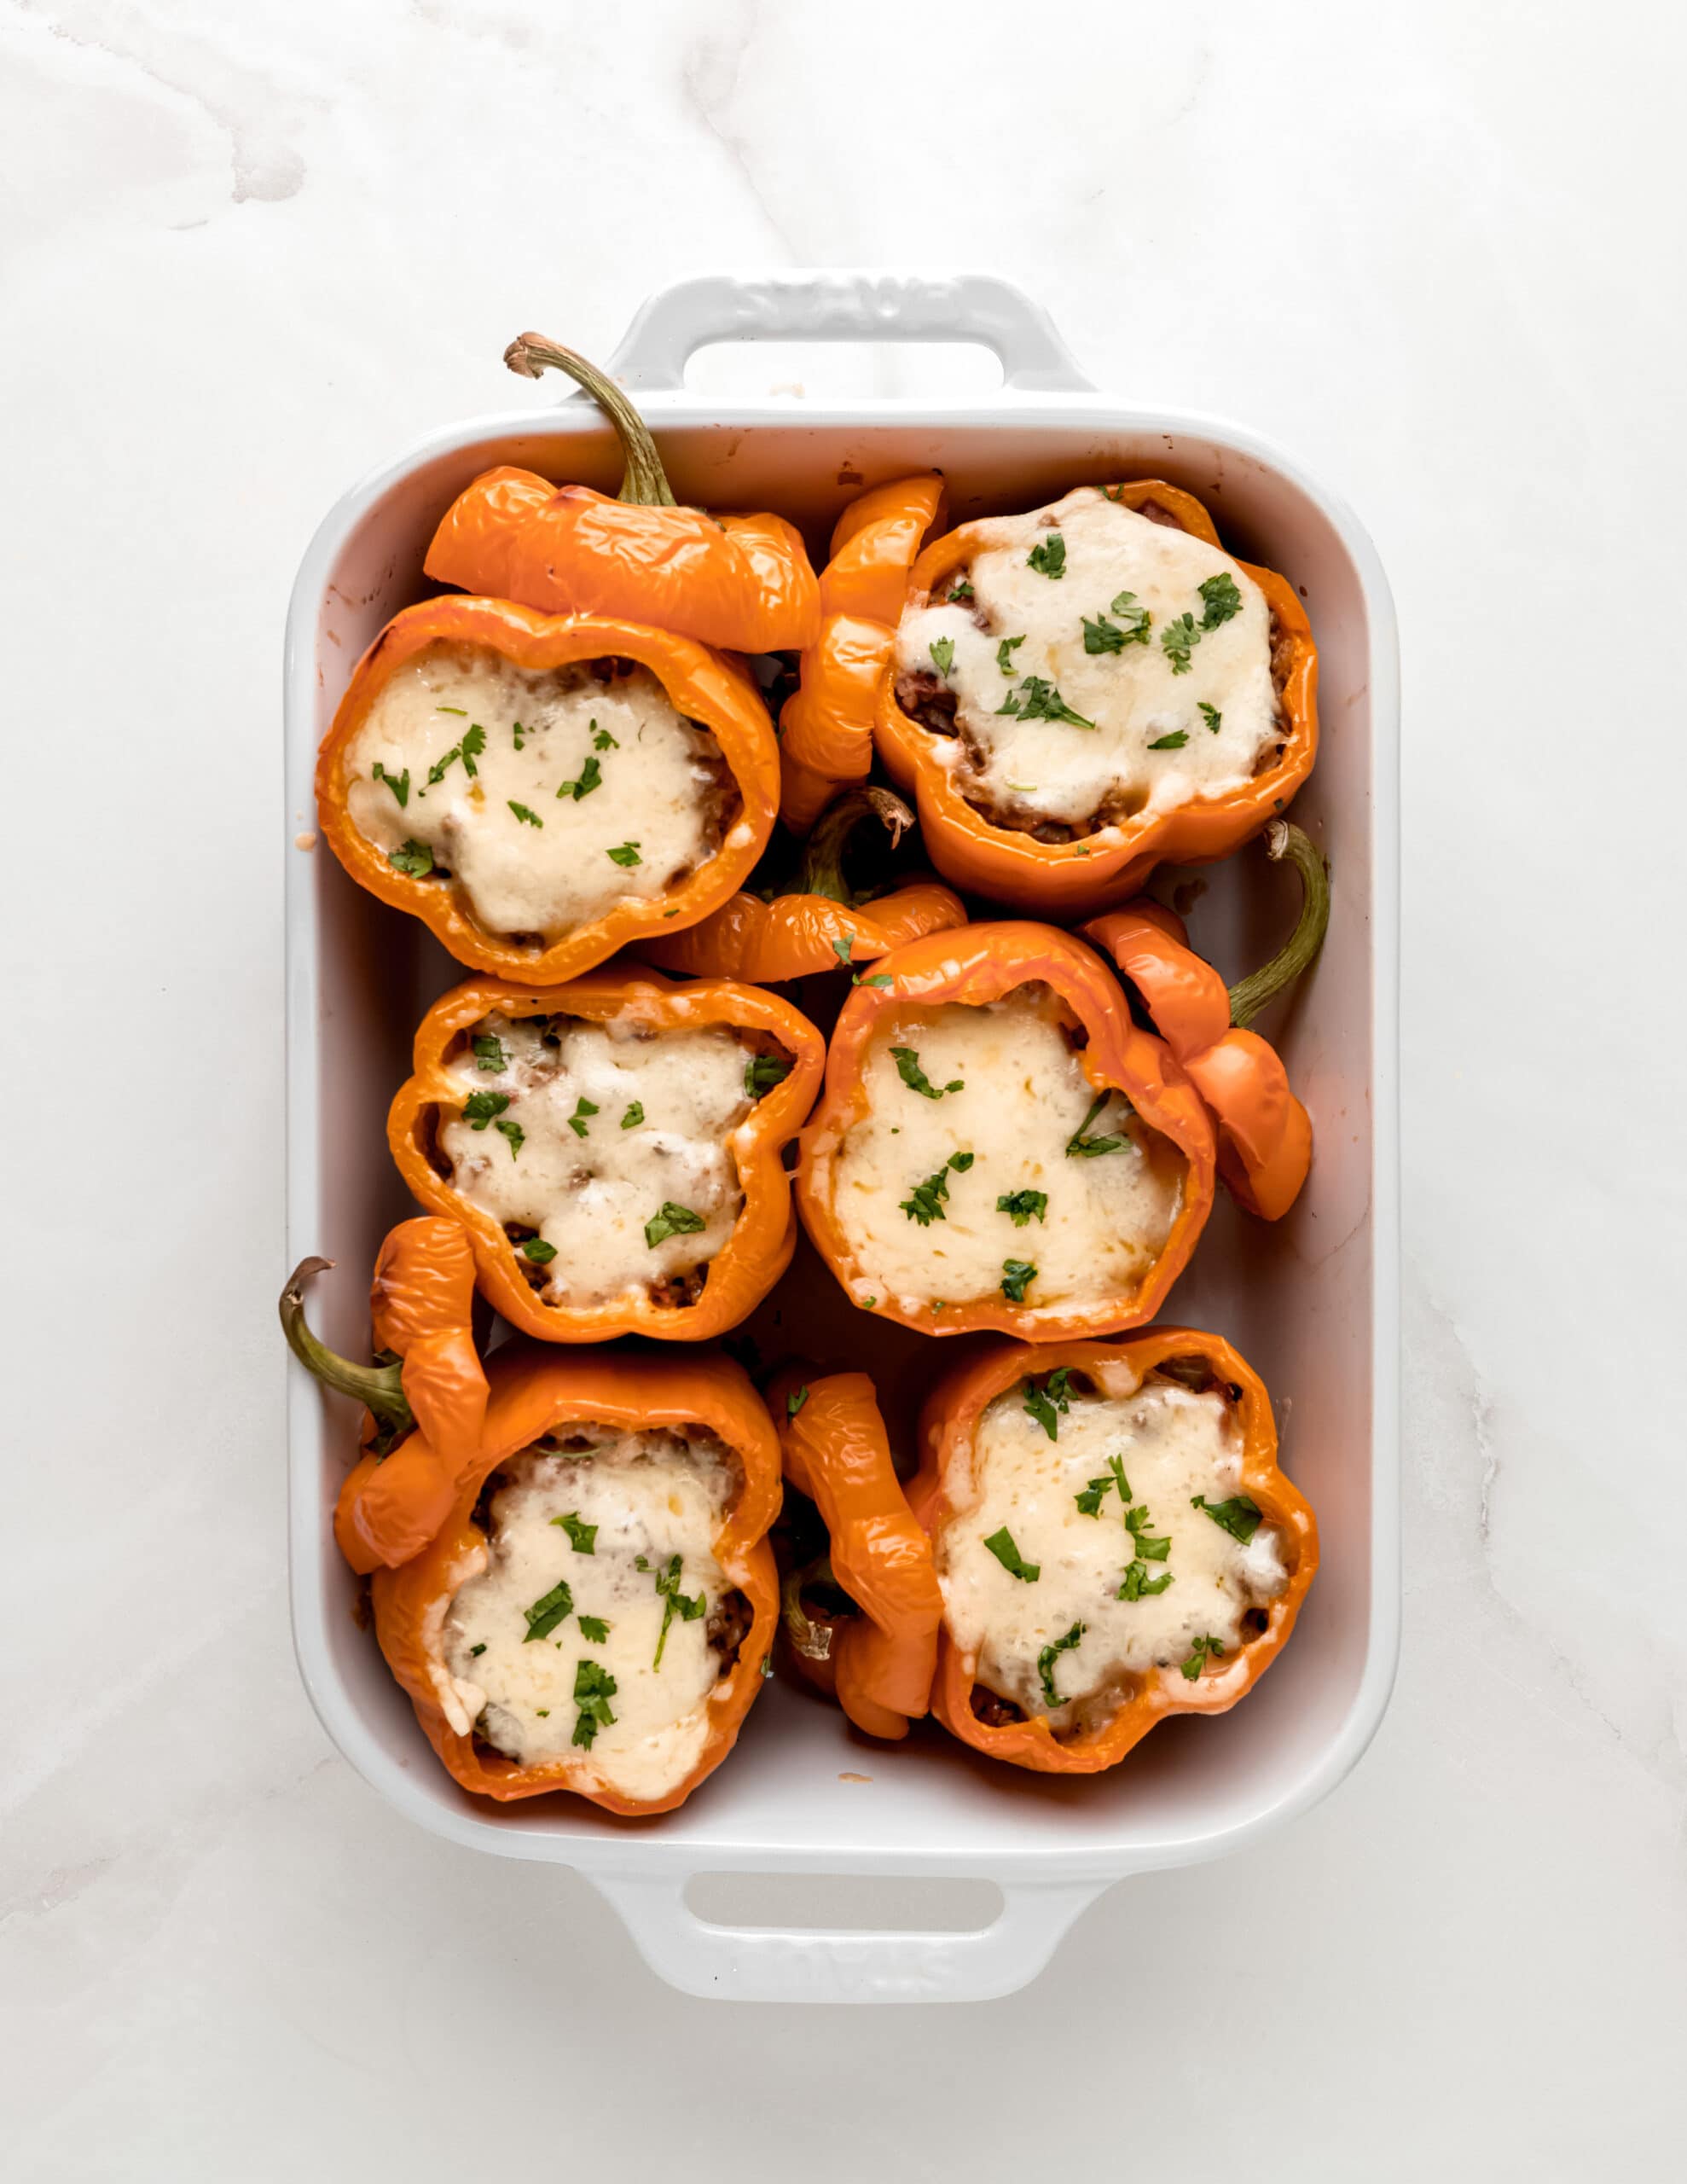 A large white ceramic baking dish with up-right orange bell peppers, fully baked, with cheese on top and cilantro to garnish.